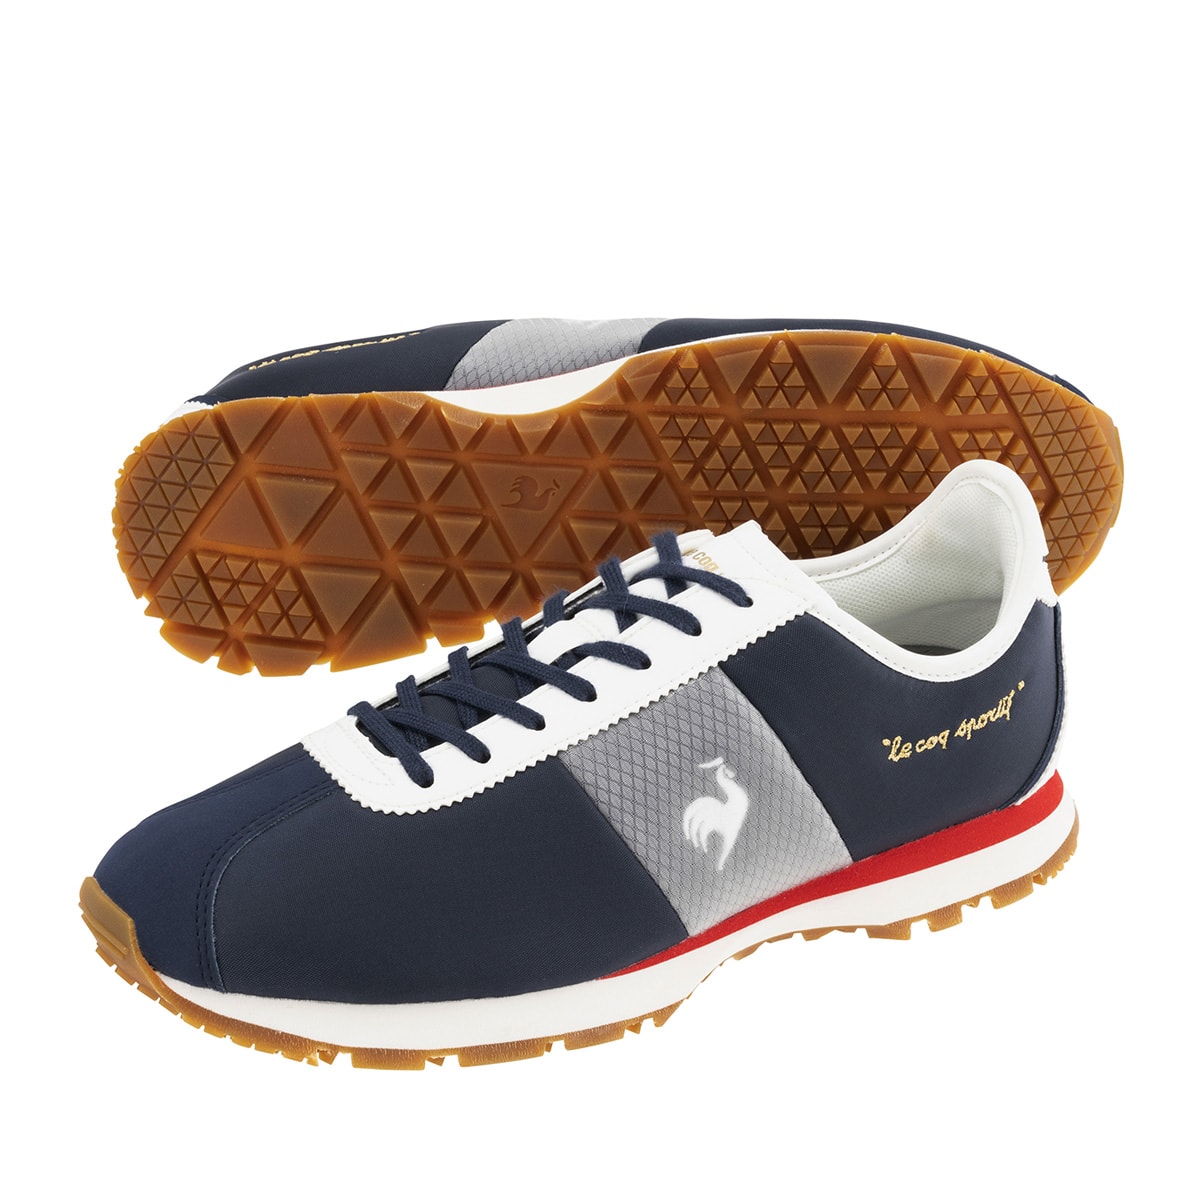 le coq sportif LCS MONTPELLIER CR ネイビー / トリコロール 23SS-I_photo_large